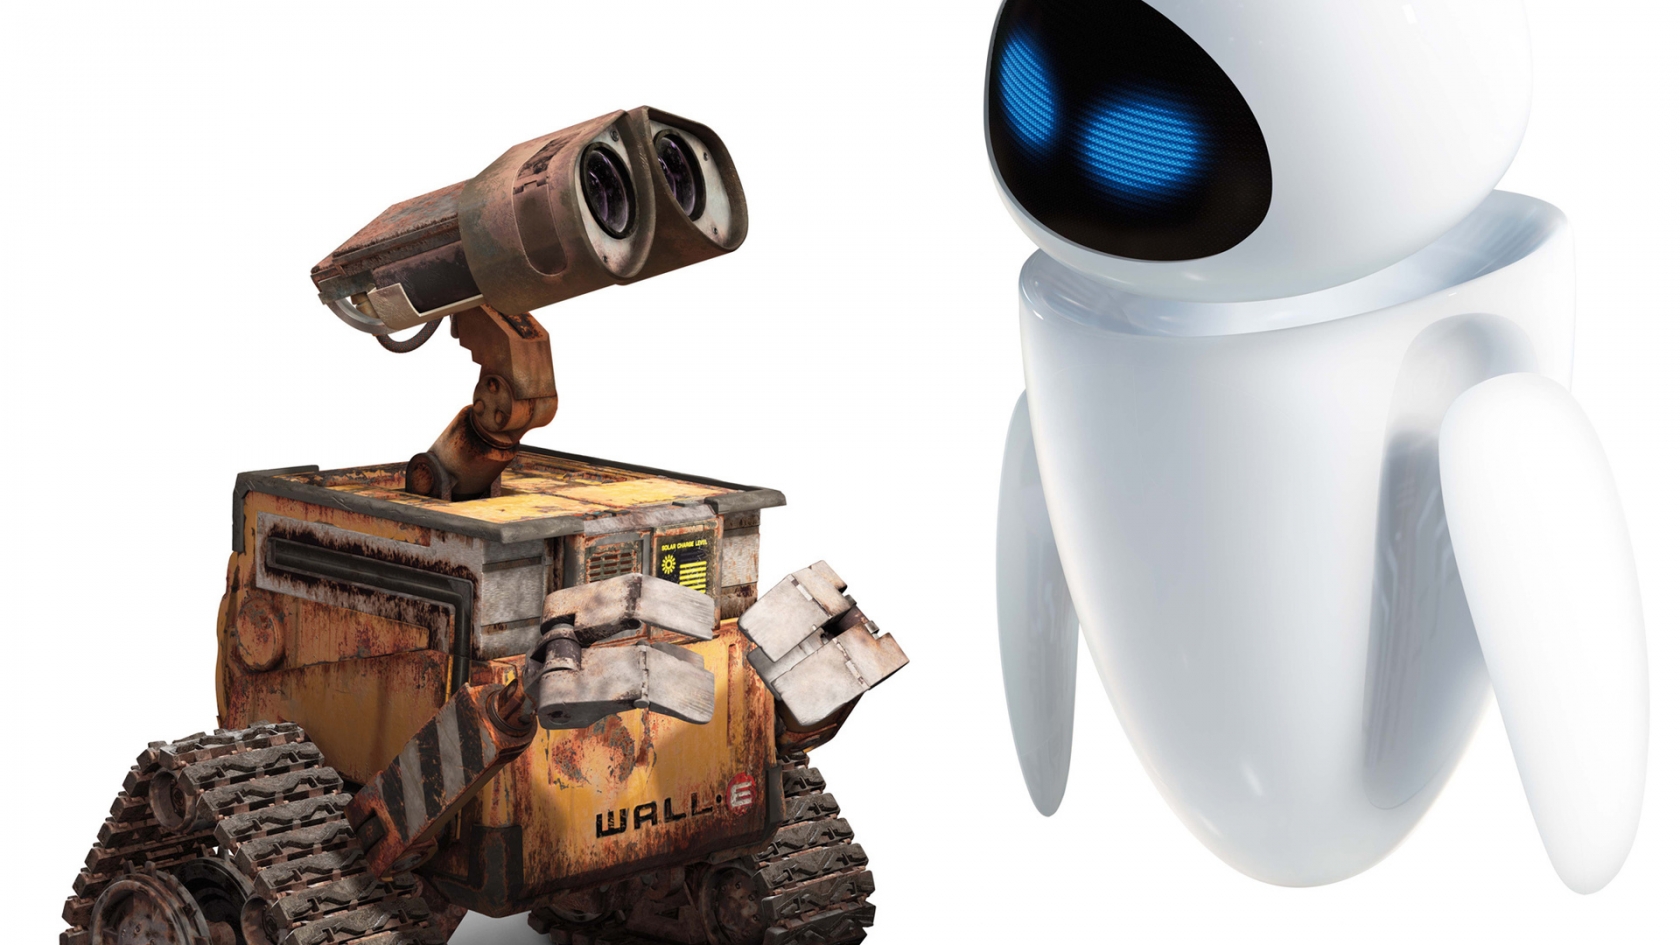 Walle Robots for 1680 x 945 HDTV resolution